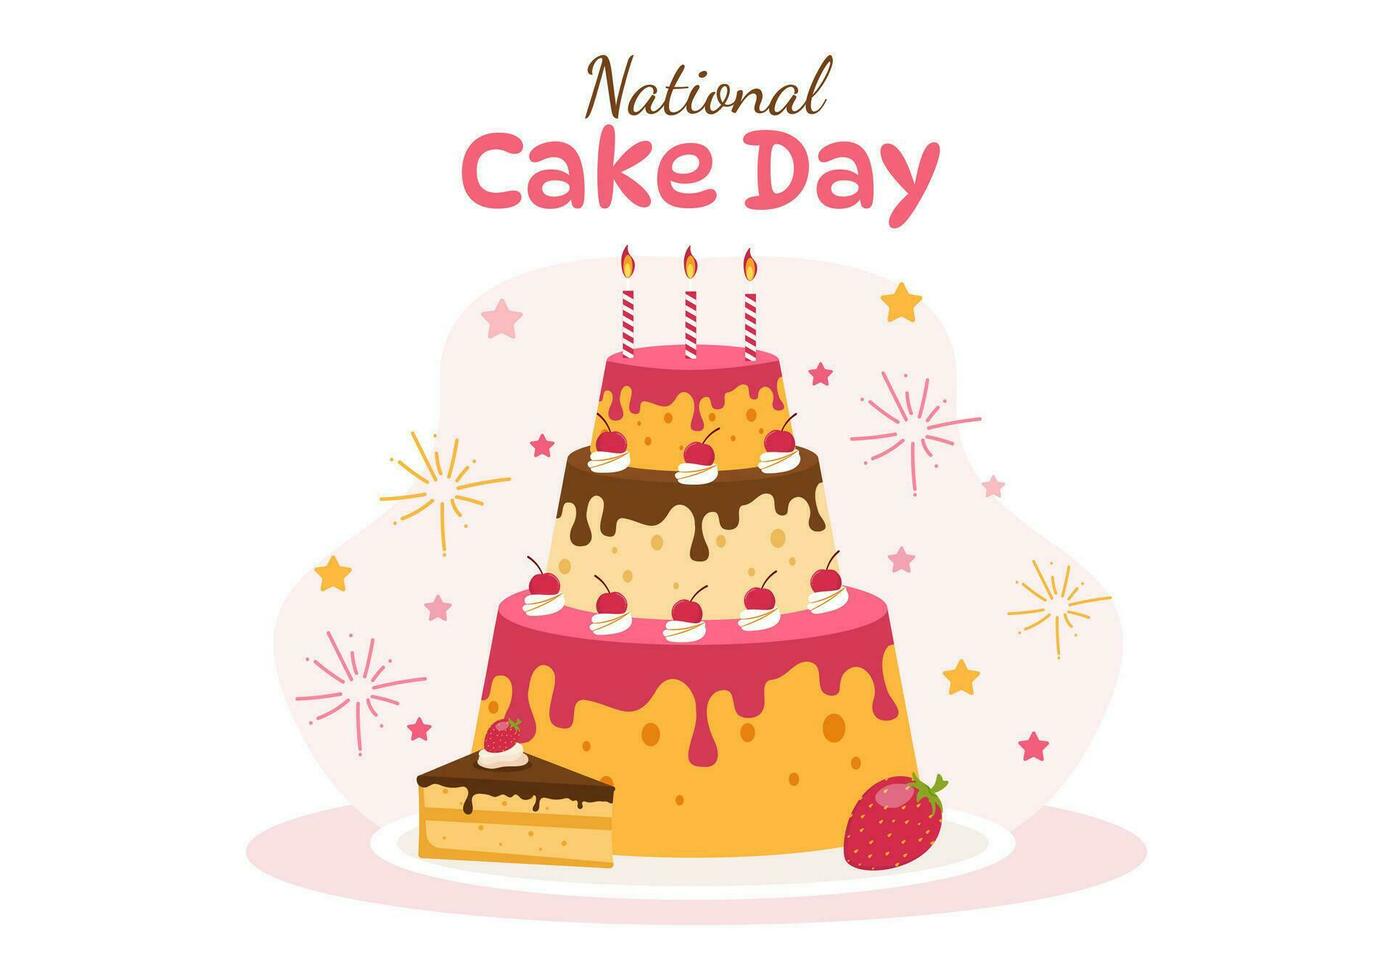 National Cake Day Vector Illustration on Holiday Celebrate November 26 with Sweet Bread in Flat Cartoon Pink Background Design Template